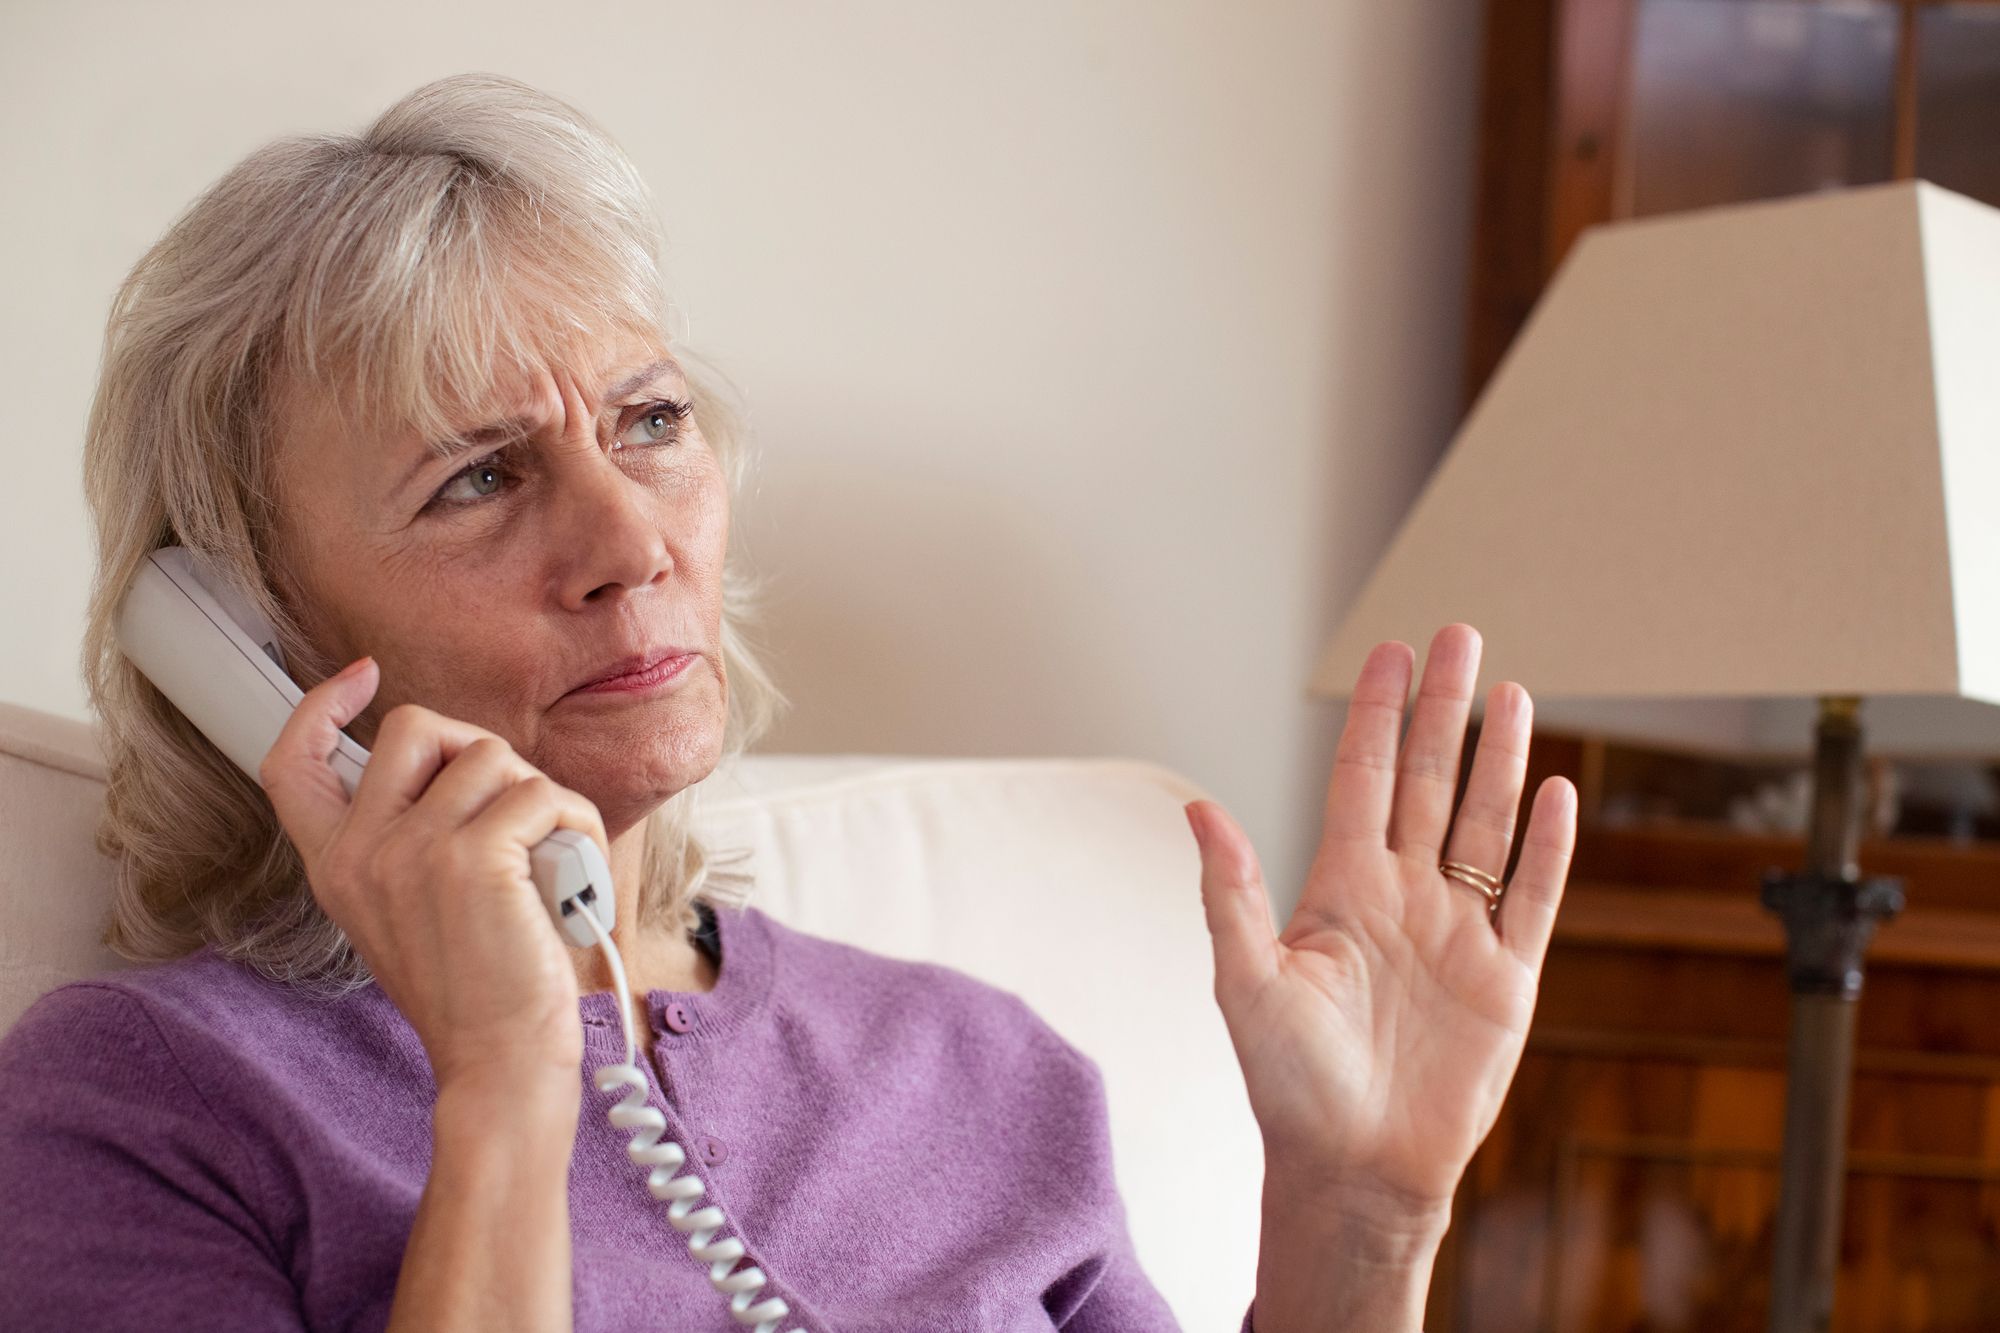 A senior woman in a purple shirt gestures as she talks on a landline phone - yodel technologies